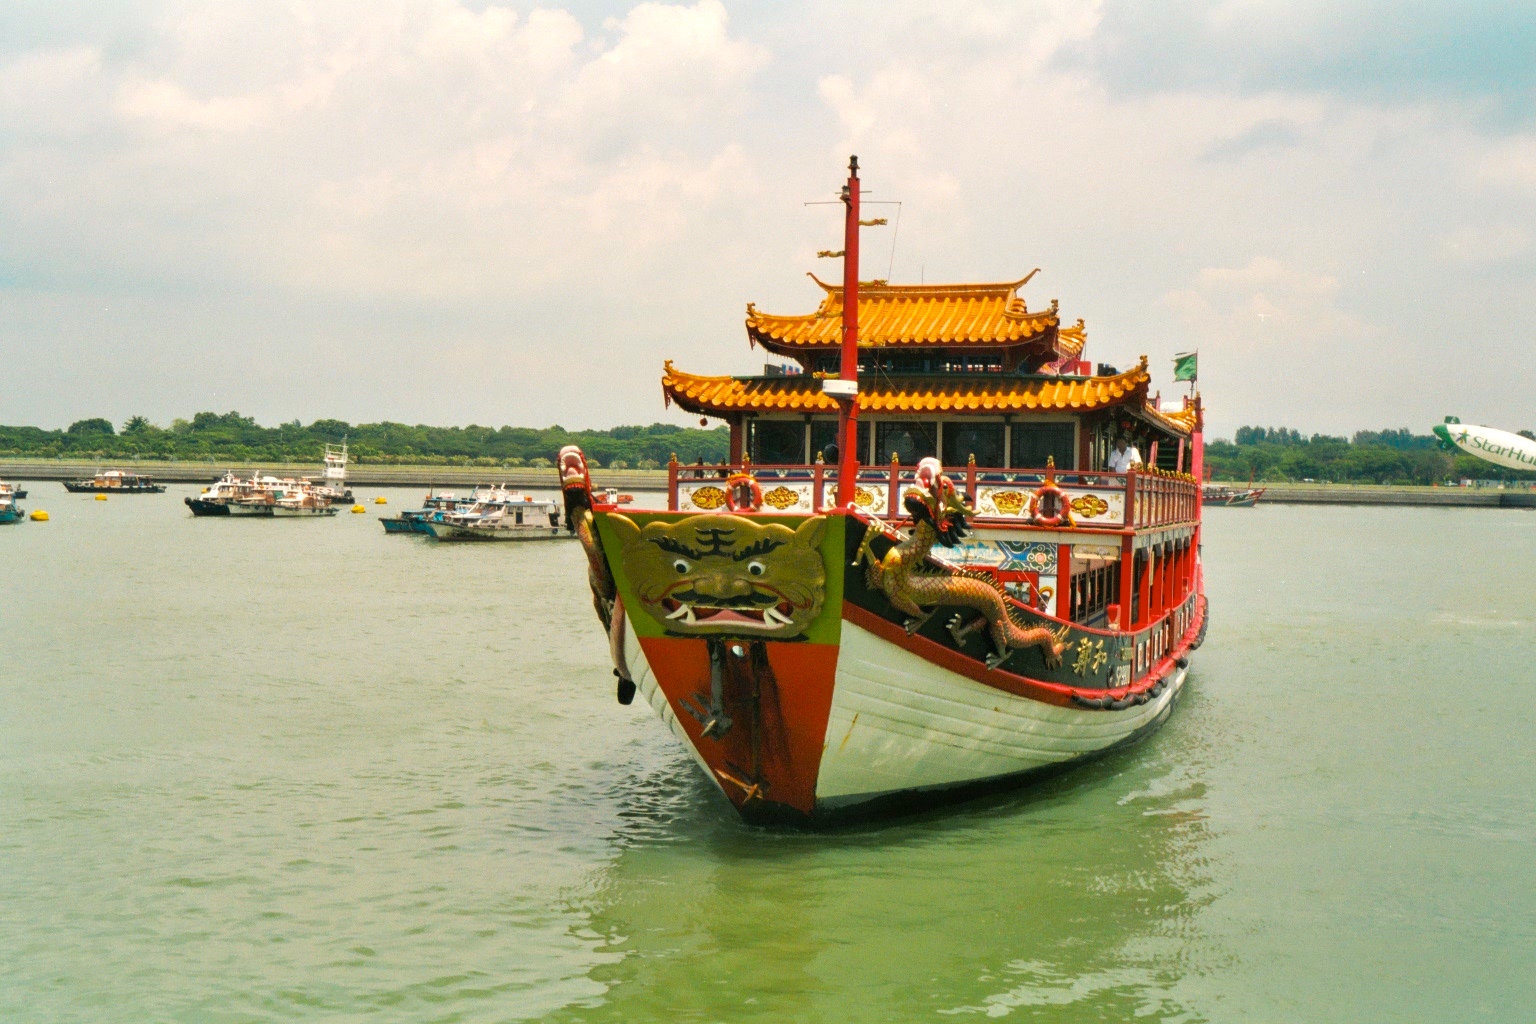 Colourful, dragon-laden Bumboat in the Singapore River.